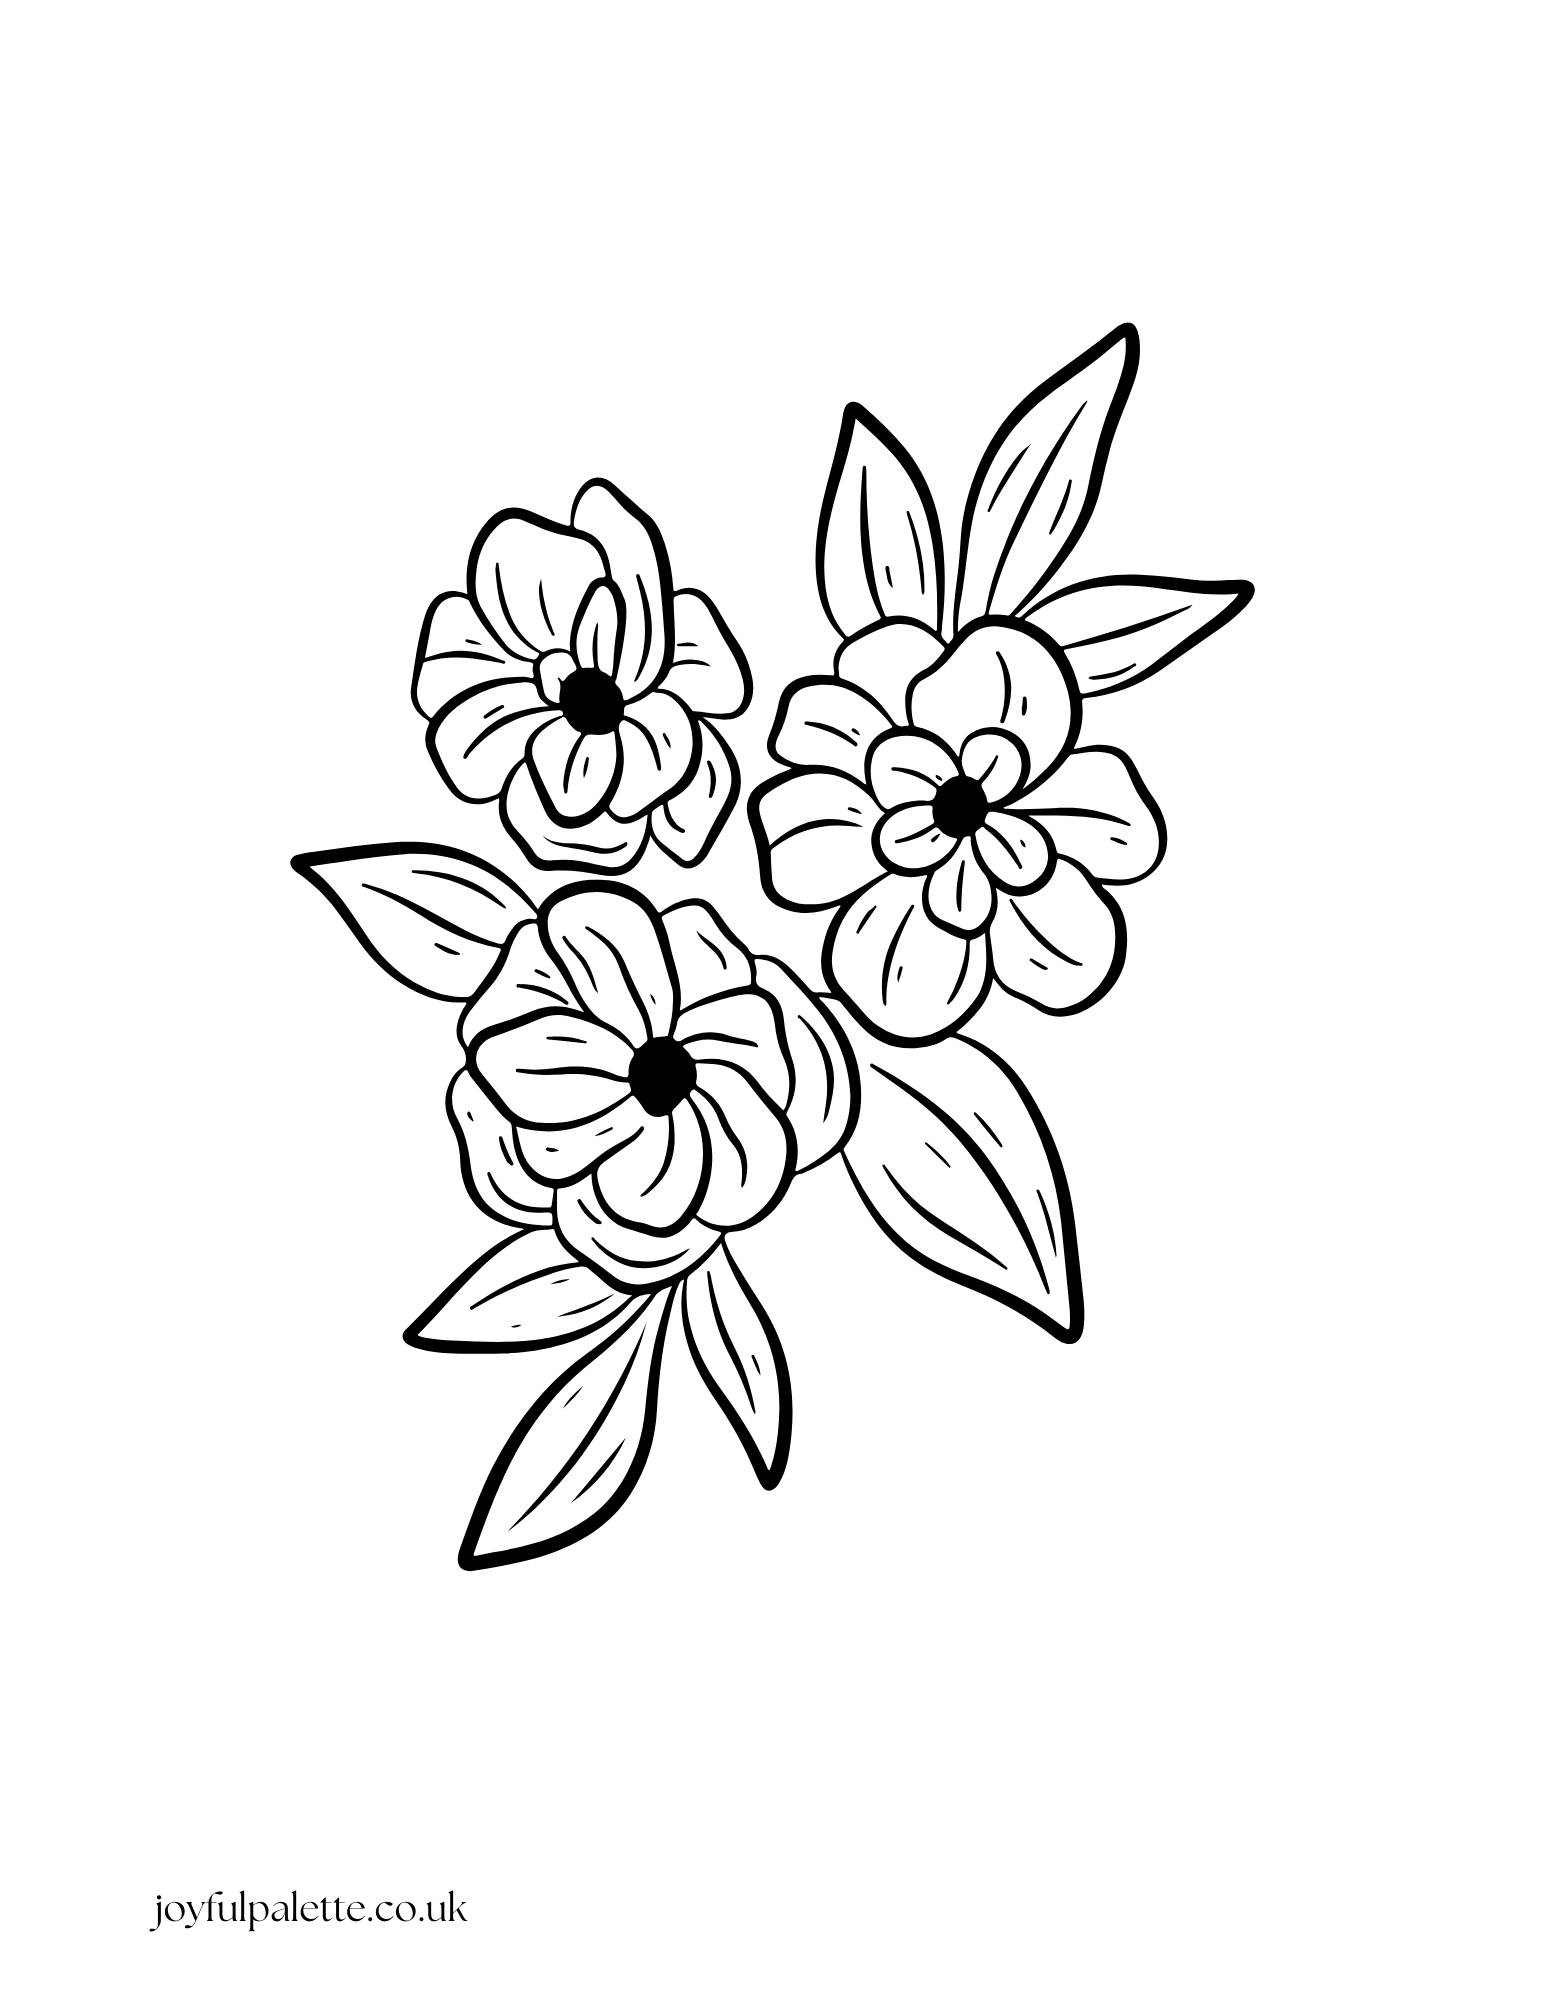 Flower Coloring Page for Kids